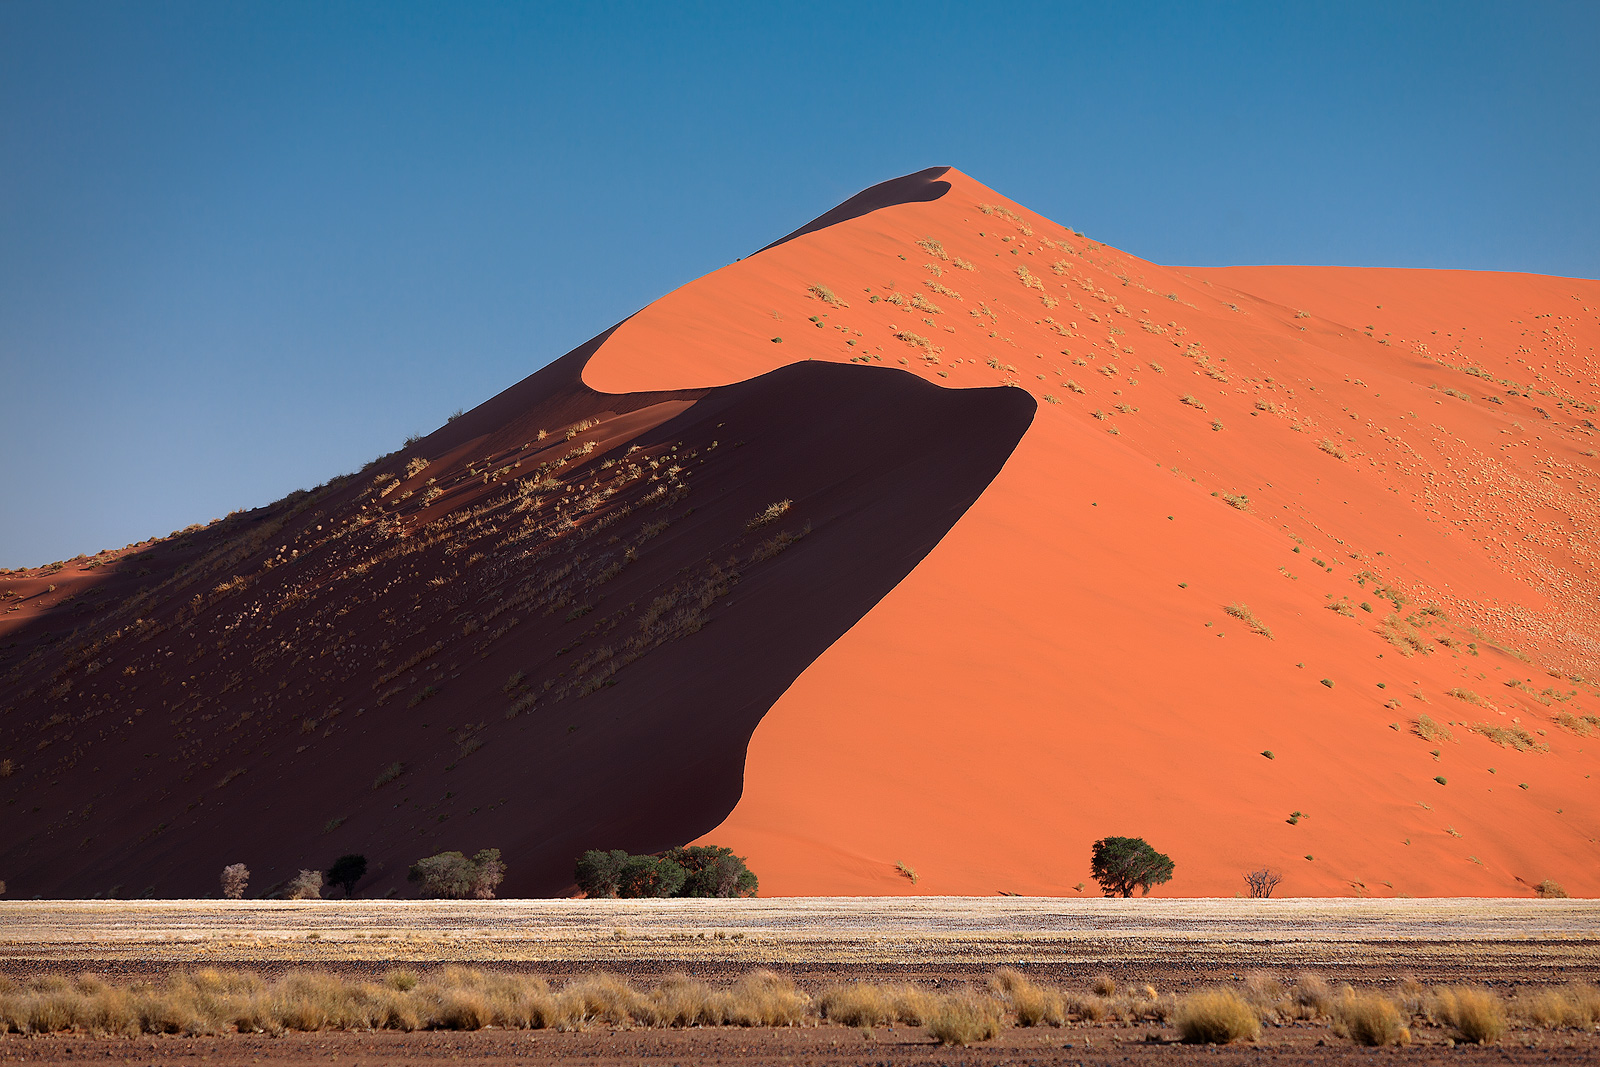 An s-curve in the orange sand dunes against a clear blue sky